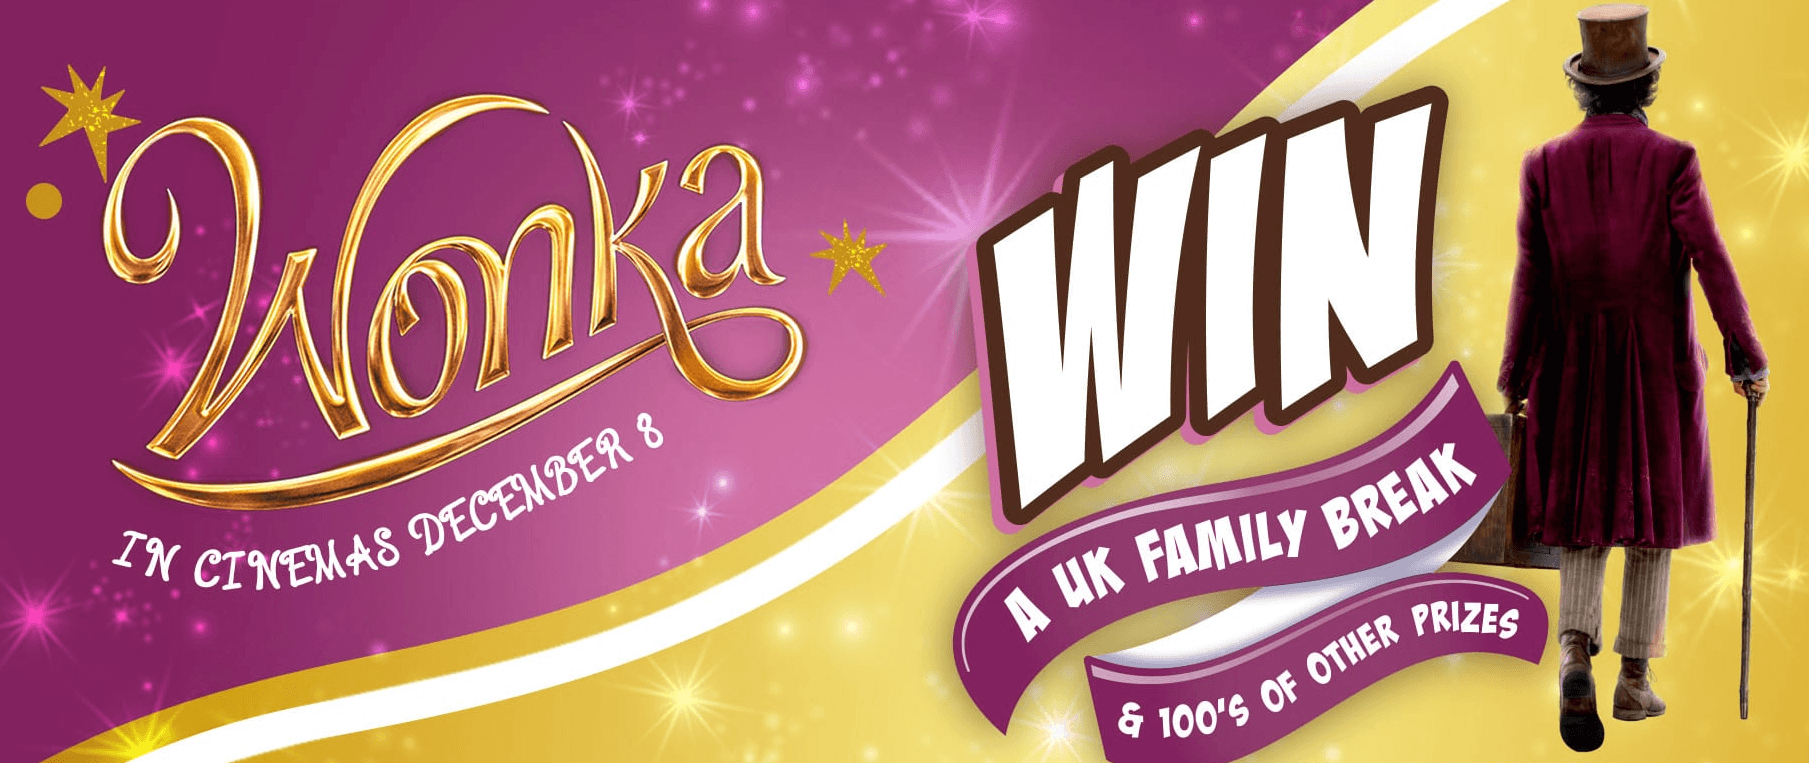 Kinder Wonka Competition: Win 1 of 5 UK Family Breaks